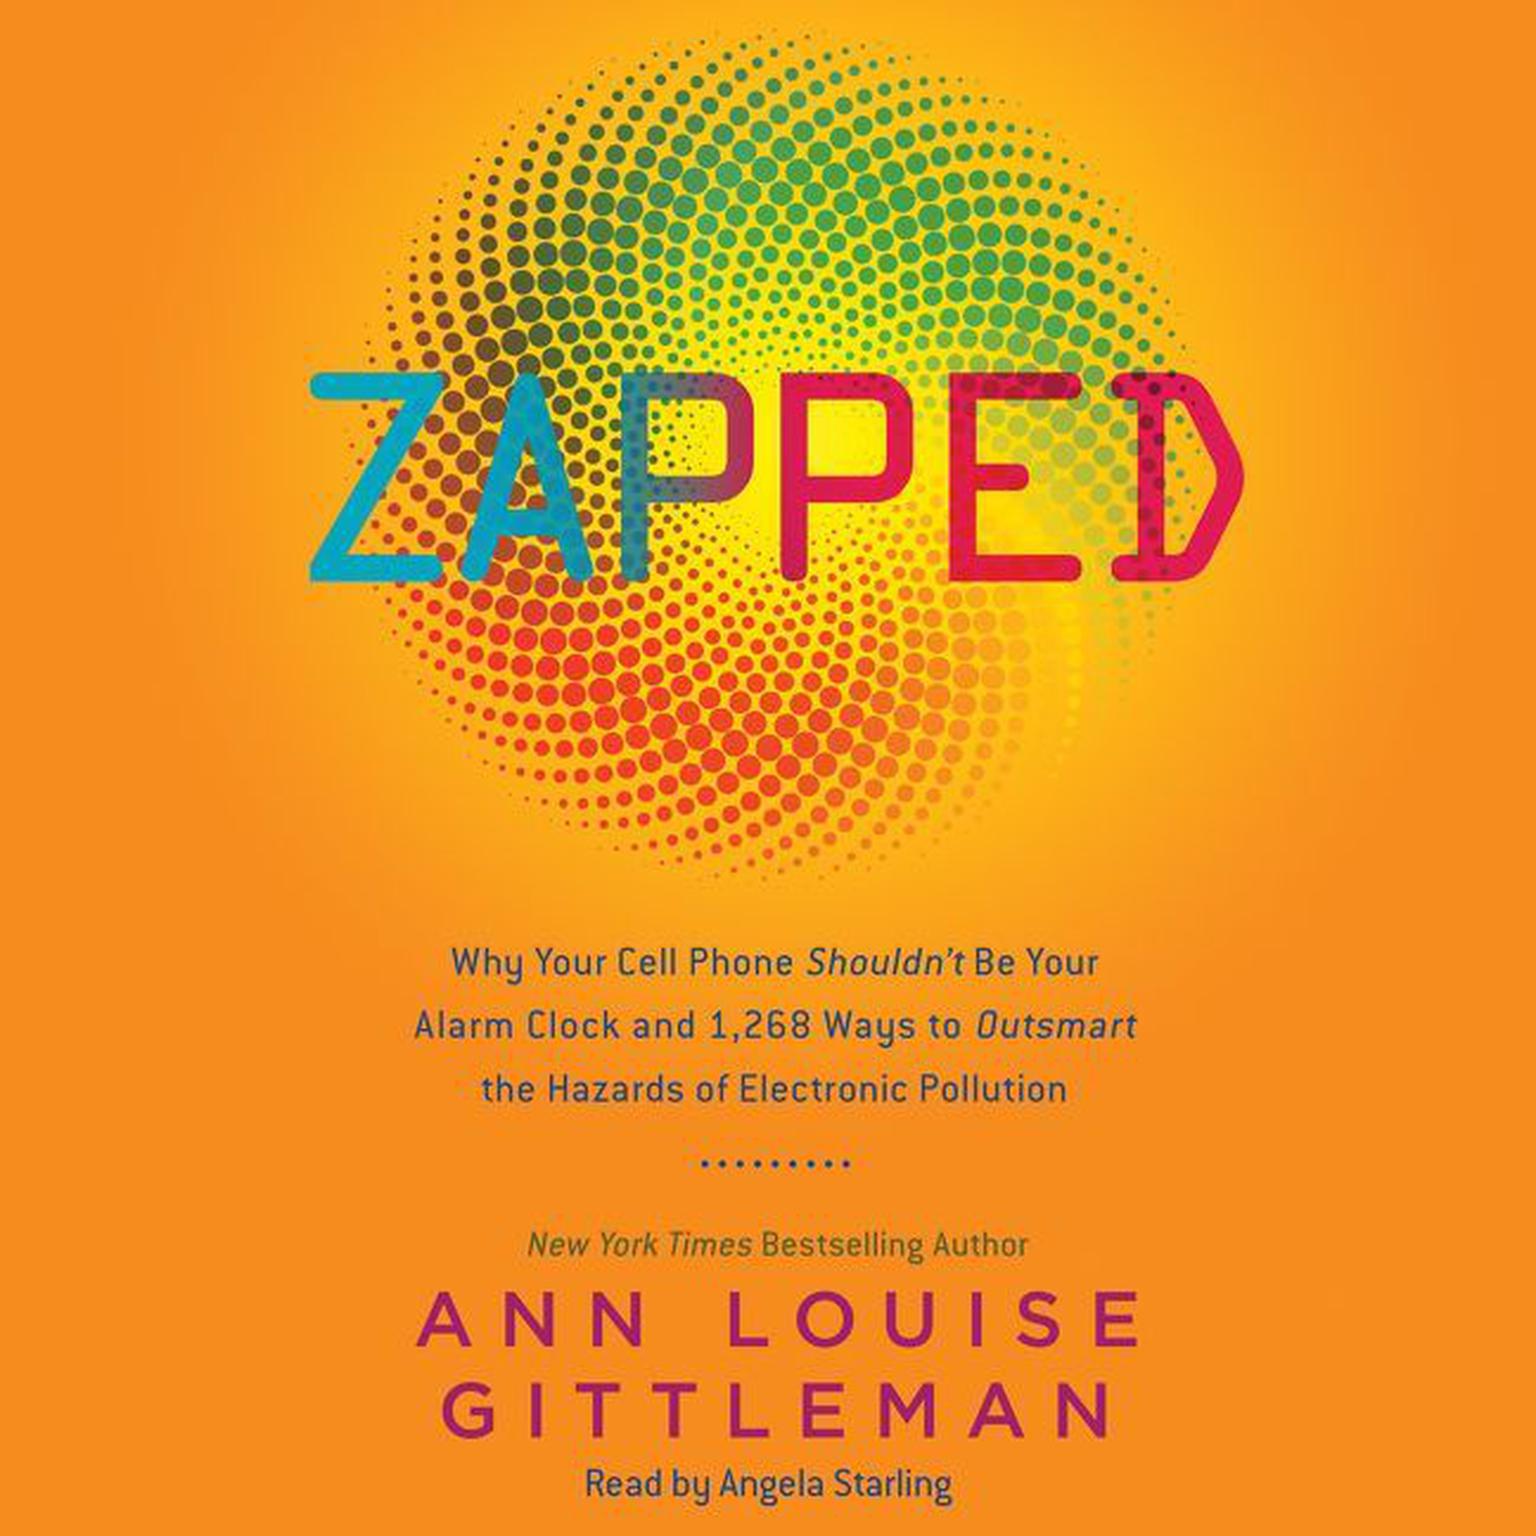 Zapped: Why Your Cell Phone Shouldnt Be Your Alarm Clock and 1,268 Ways to Outsmart the Hazards of Electronic Pollution Audiobook, by Ann Louise Gittleman